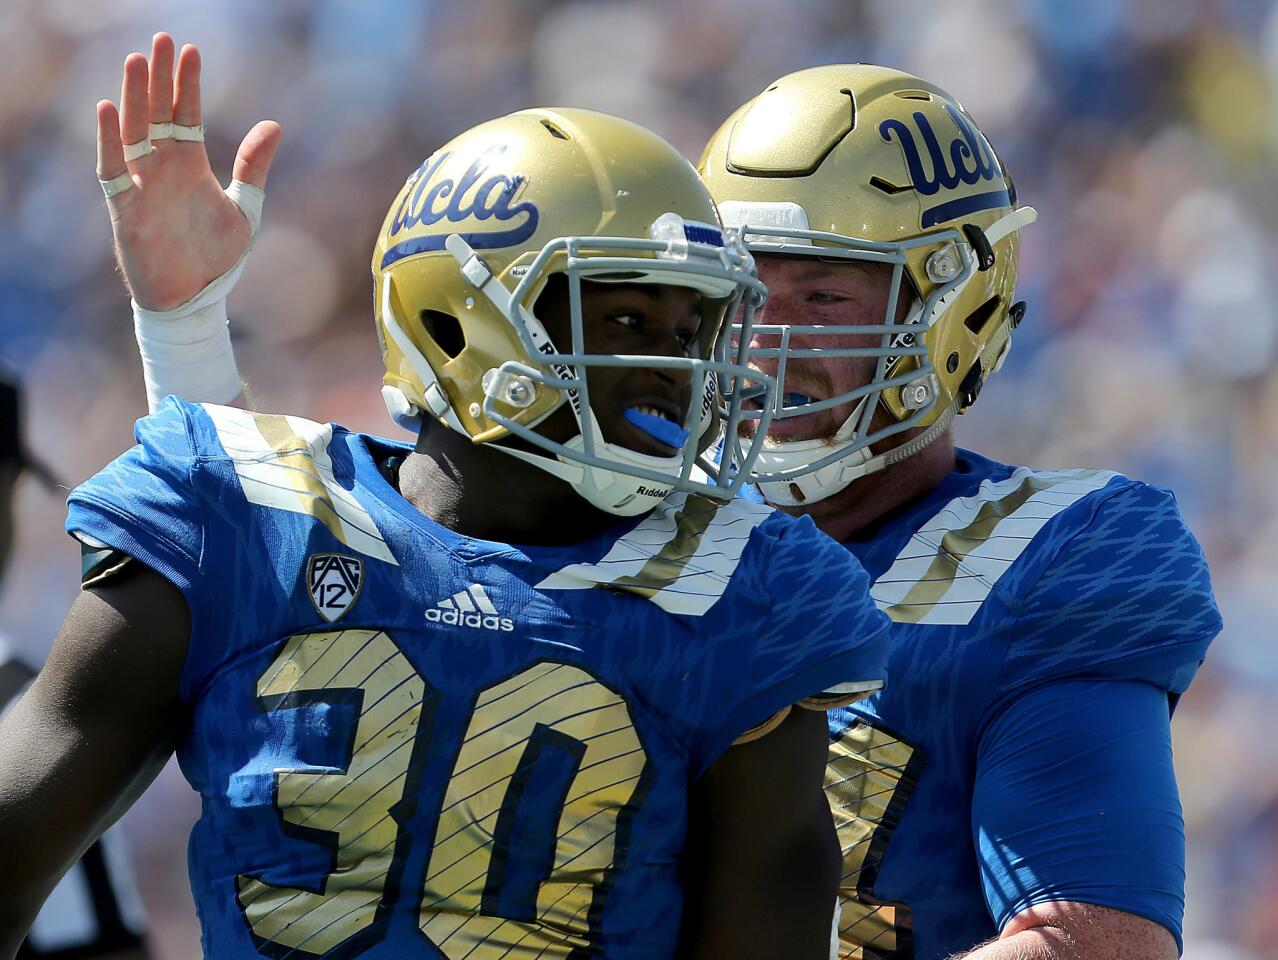 UCLA linebacker Myles Jack is congratulated by center Jake Brendel after scoring a touchdown against Virginia. Both will be in Indianapolis for the NFL Scouting Combine.